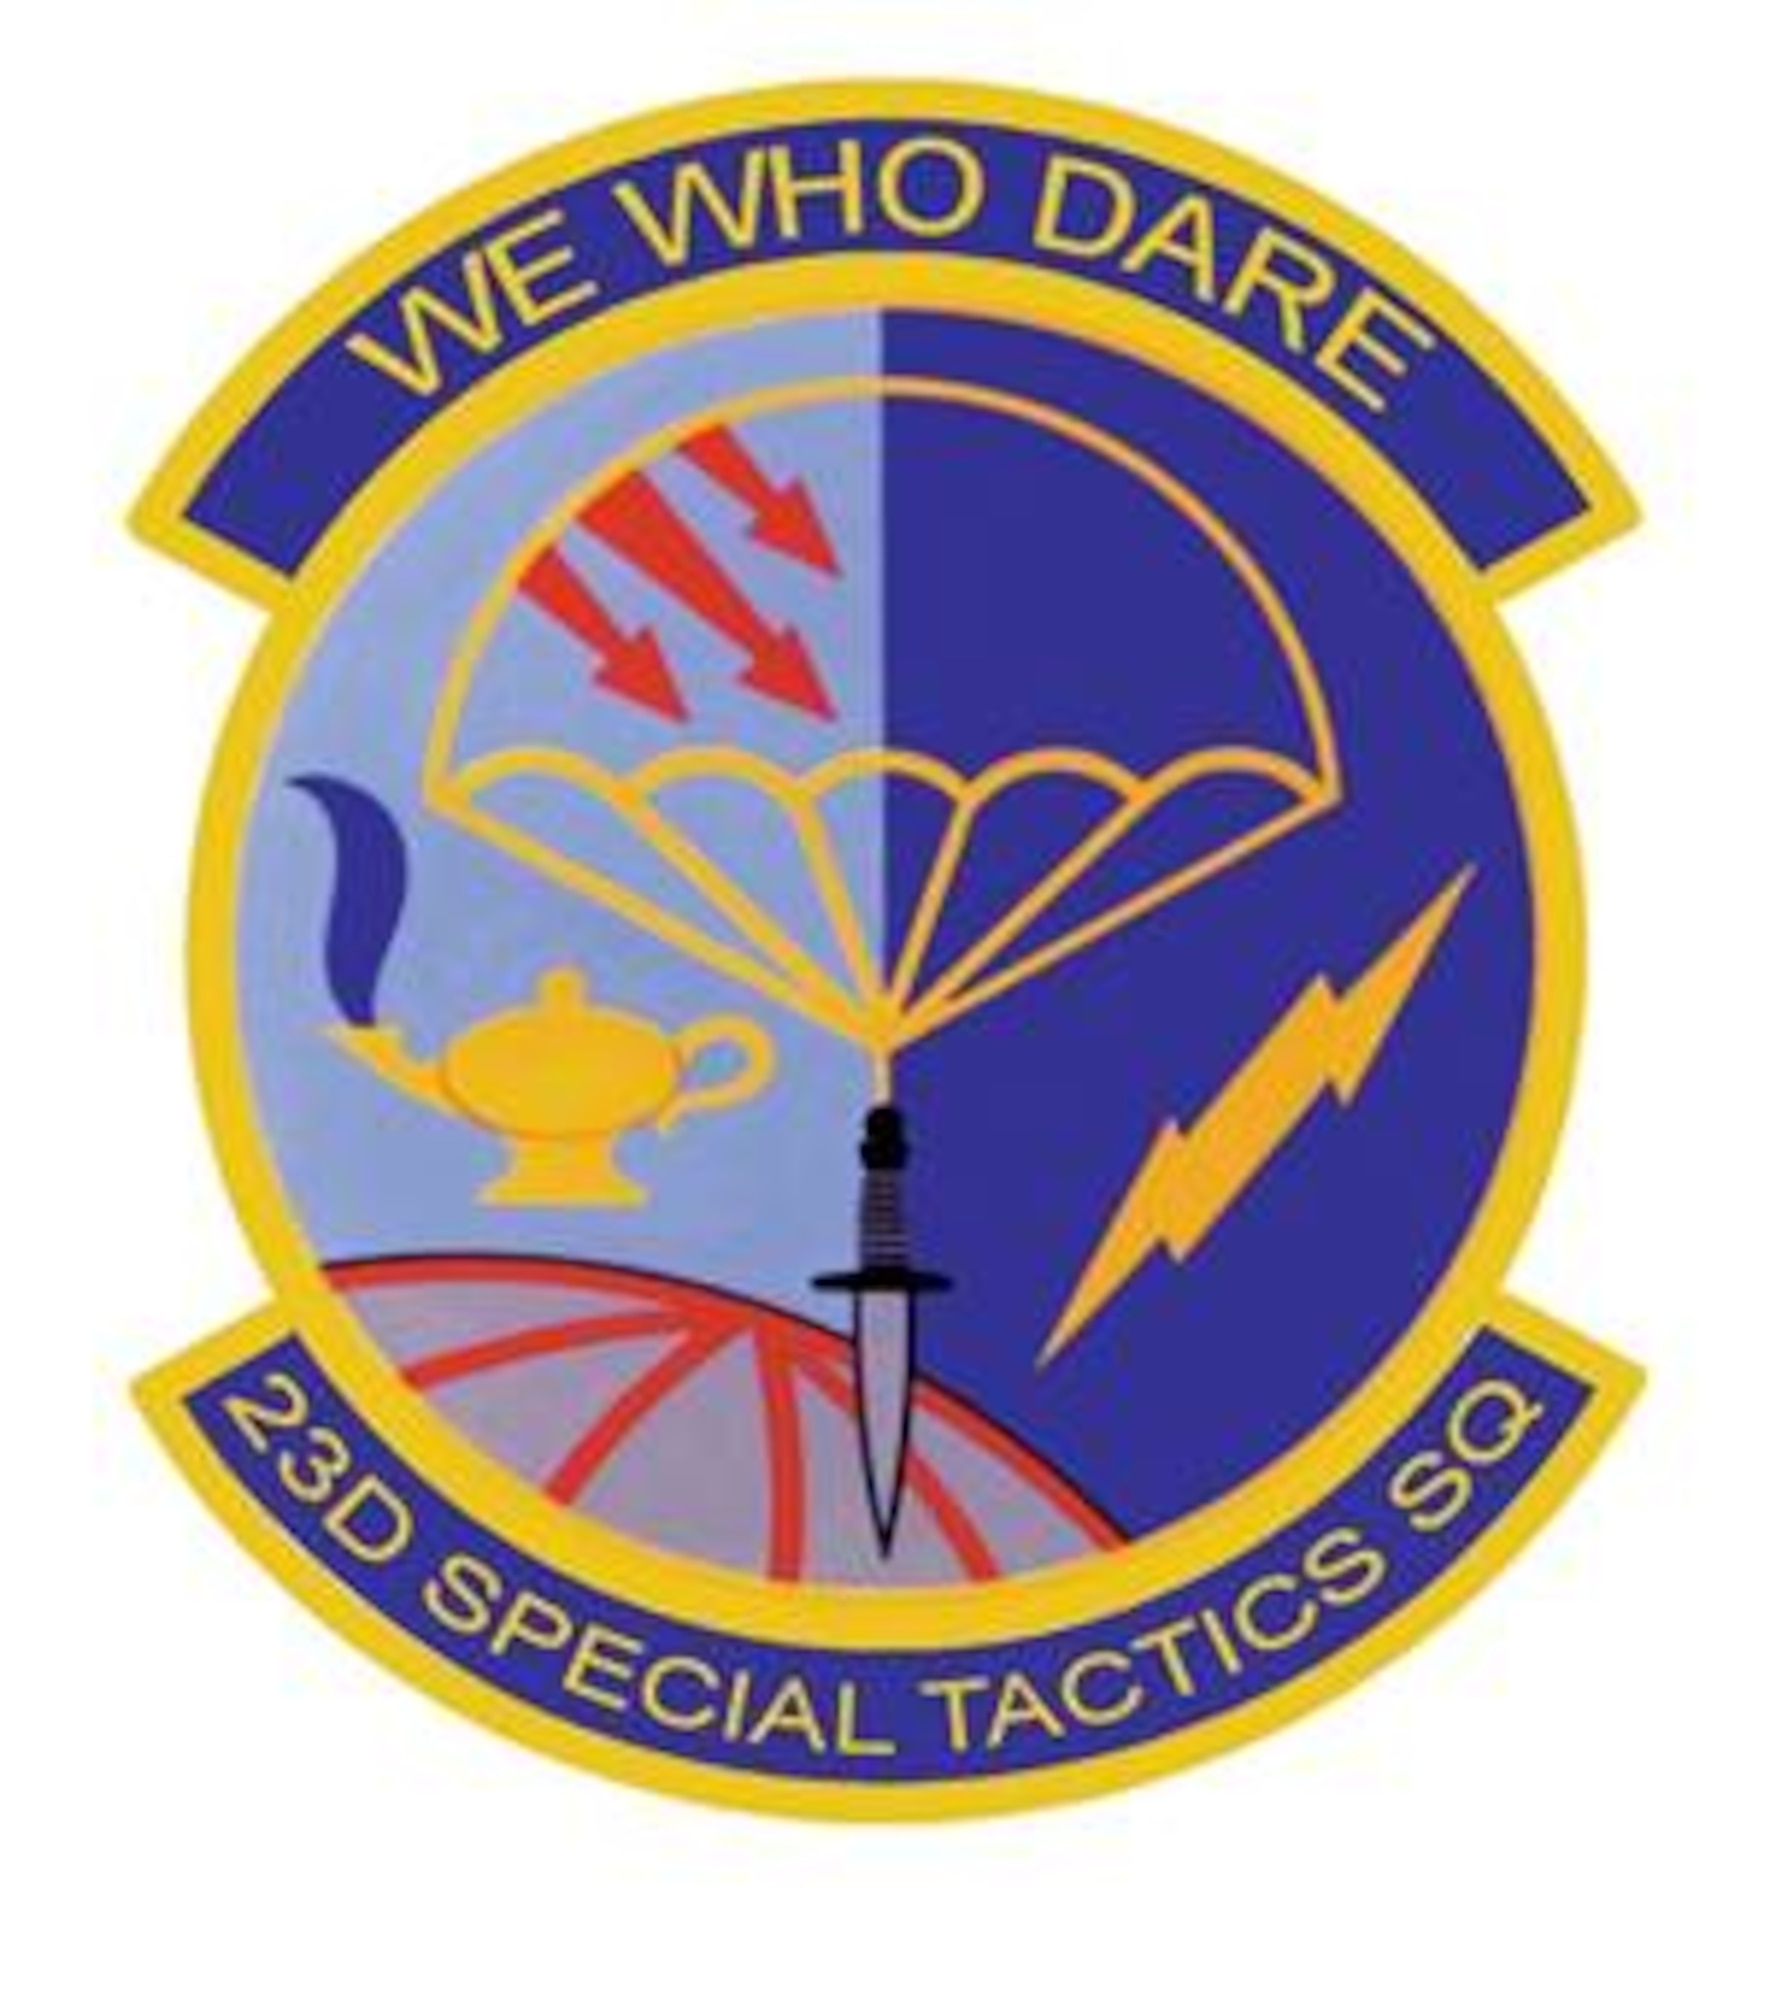 23rd Special Tactics Squadron:  
The emblem's blue and yellow are the Air Force colors. Blue alludes to the sky, the primary theater of Air Force operations. Yellow refers to the sun and the excellence required of Air Force personnel. The globe stands for the worldwide commitment of Special Tactics Combat Controllers and Pararescuemen. The two shades of blue signify night and day deployment capability. The parachute and the dagger denote infiltration and commando operations respectively. The arrows represent triple threat capabilities—land, sea, or air. The lightning bolt indicates quick action medical and communications capabilities. The lamp of knowledge reflects the civic action role of the unit, i.e. the unit functions as teachers and medical providers as well as warriors.